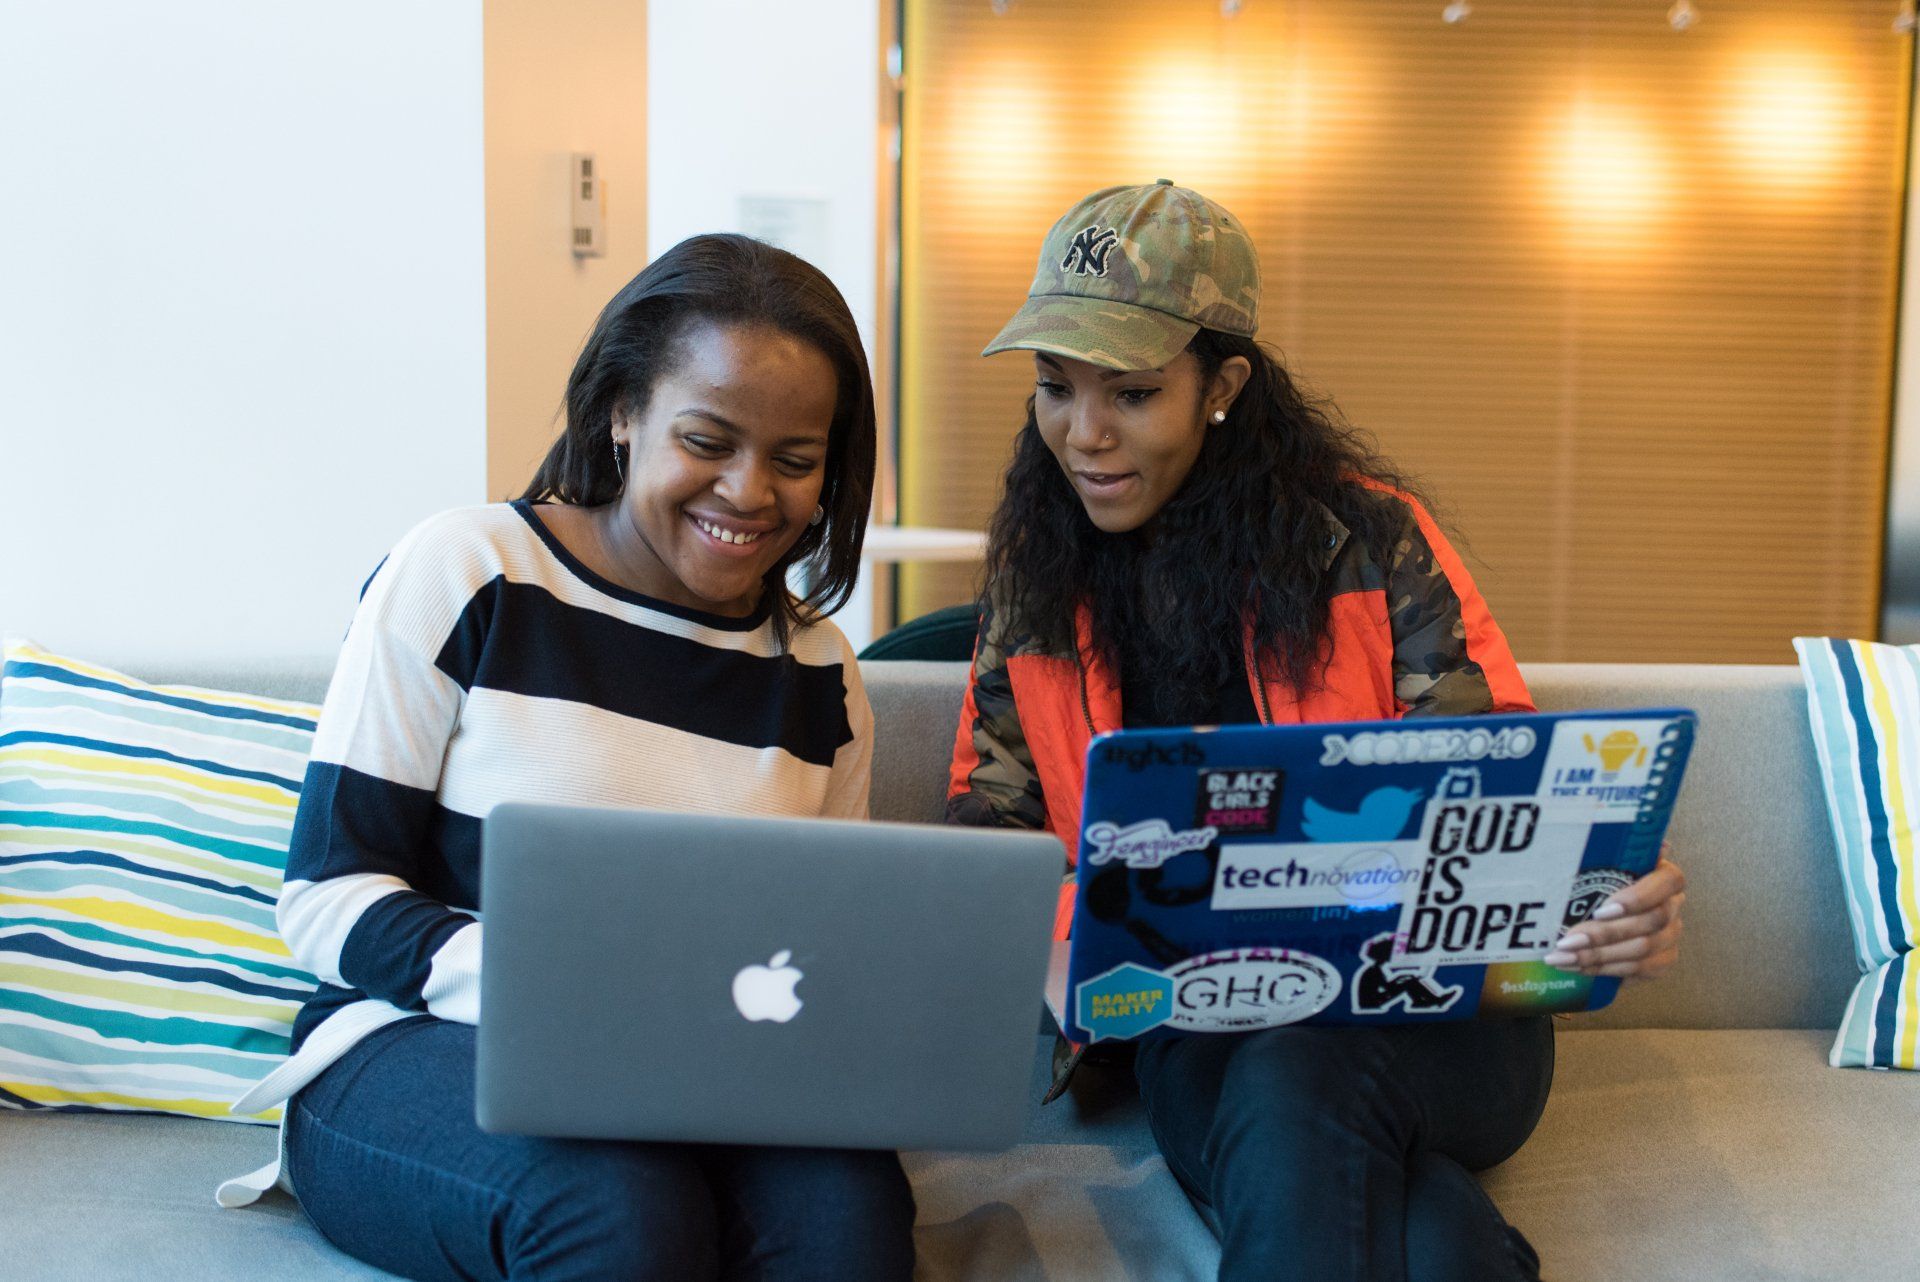 Two Black women sitting on a couch with open computers talking to each other.